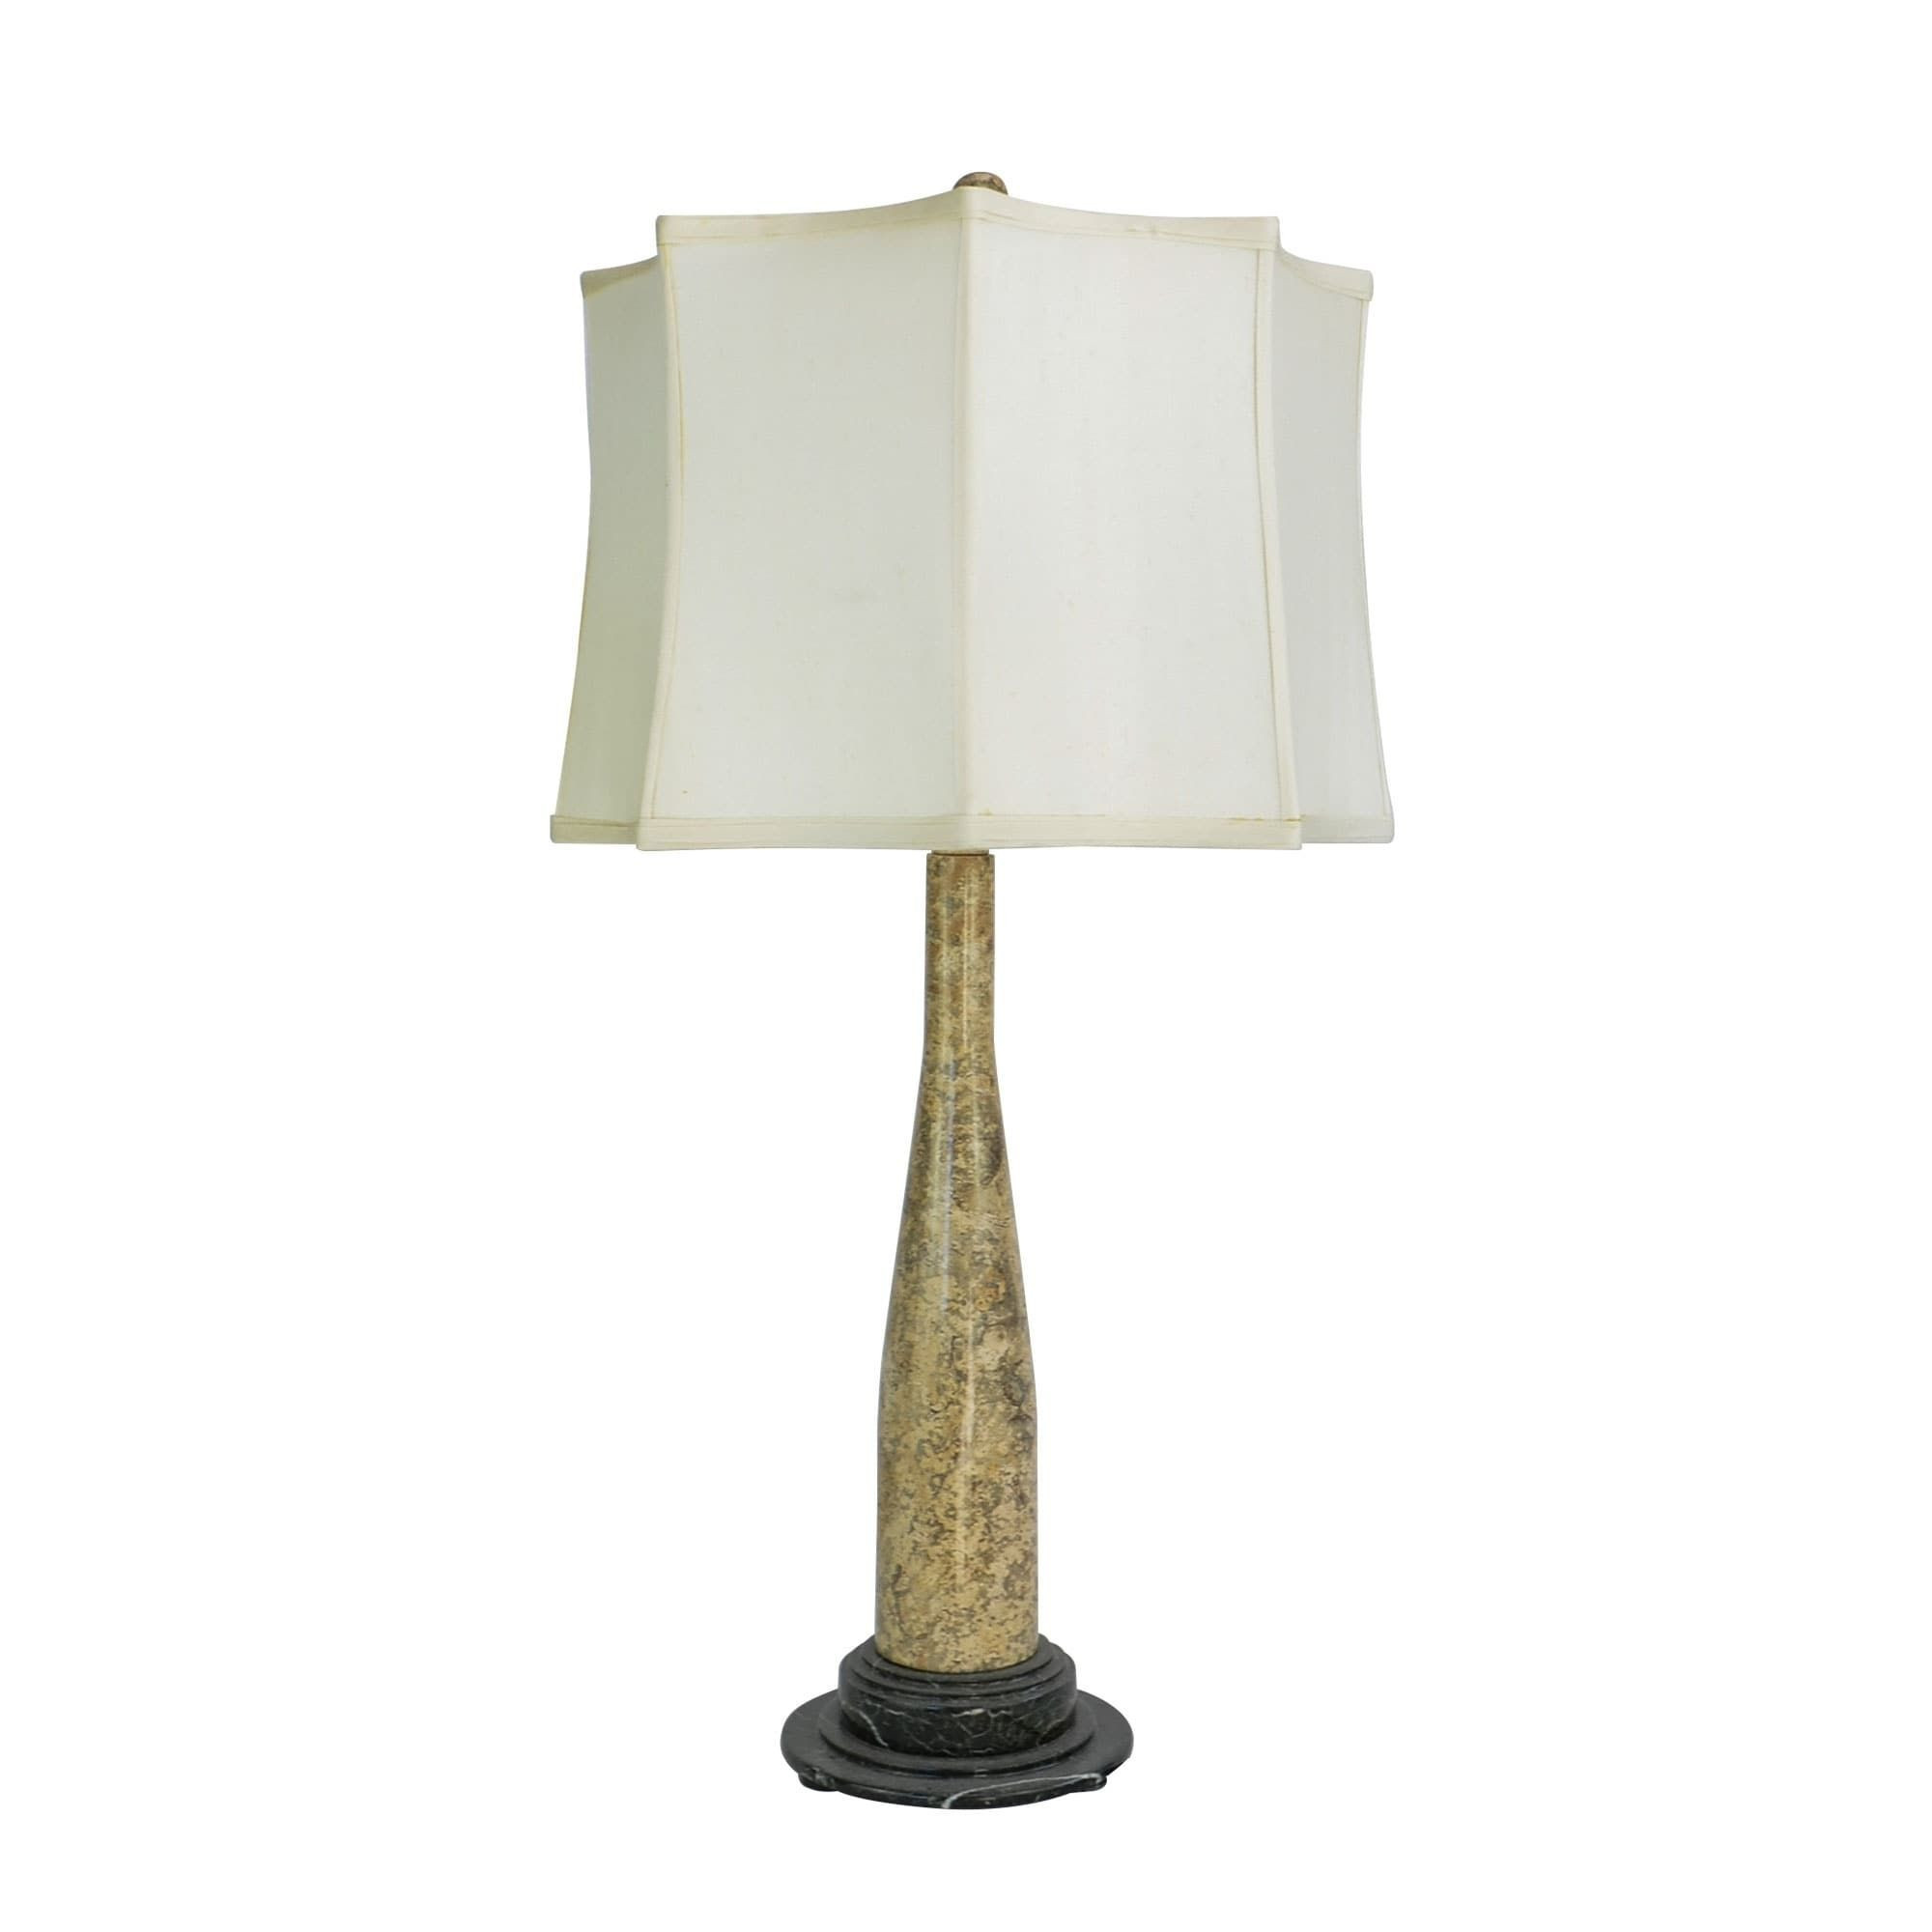 20 attractive Jonathan Adler White Vase 2024 free download jonathan adler white vase of 17 unique tall table lamps wonderfull lighting world for tall table lamps inspirational rembrandt home 32 tall marble table lamp artica with white